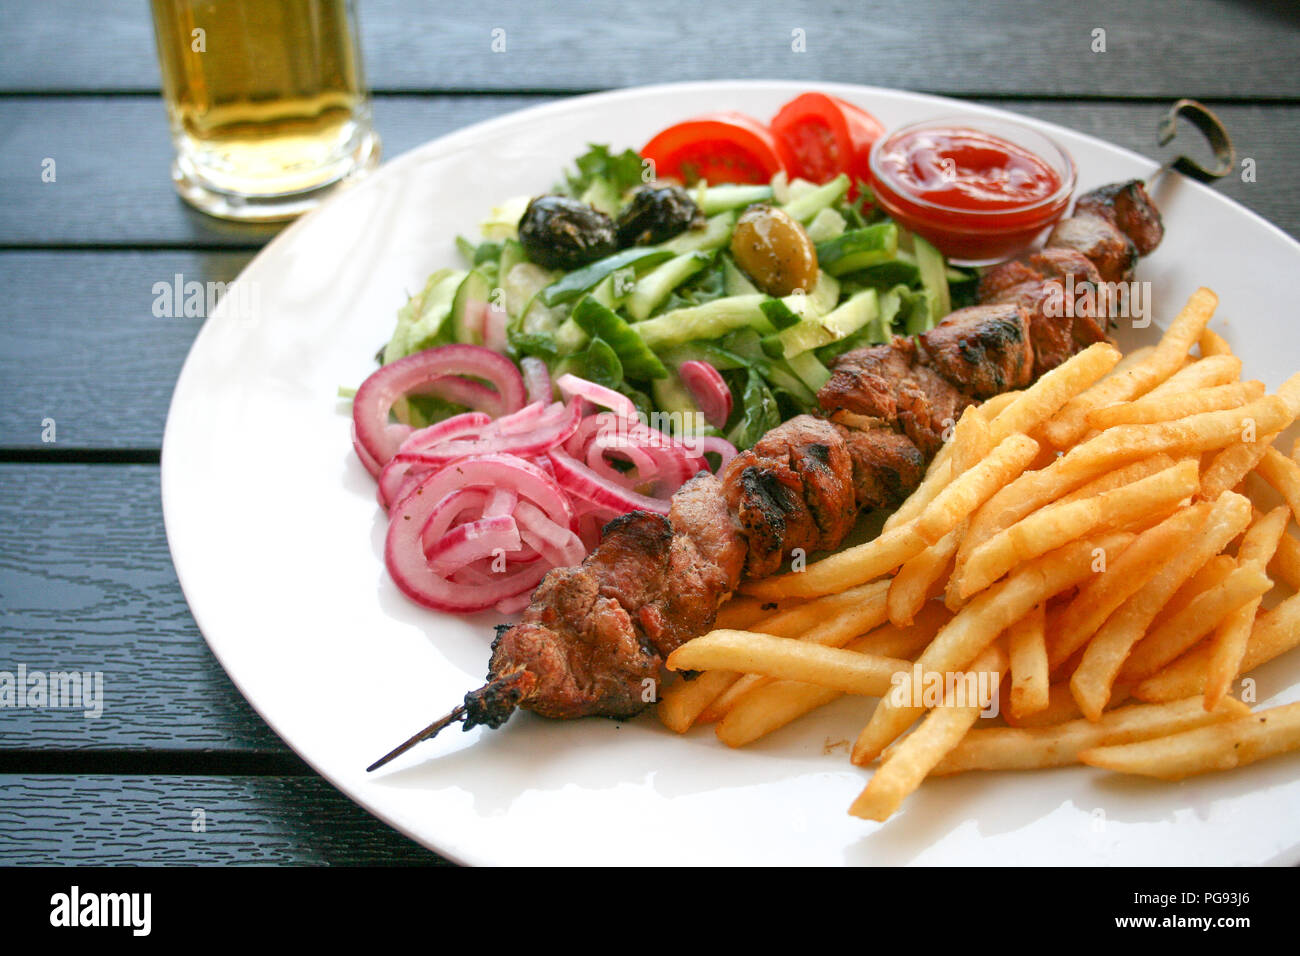 Shashlik or shashlyk of pork, dish of skewered and grilled cubes of meat, with red onion, vegetables, tomatoes, olives and french fries on a wooden ta Stock Photo